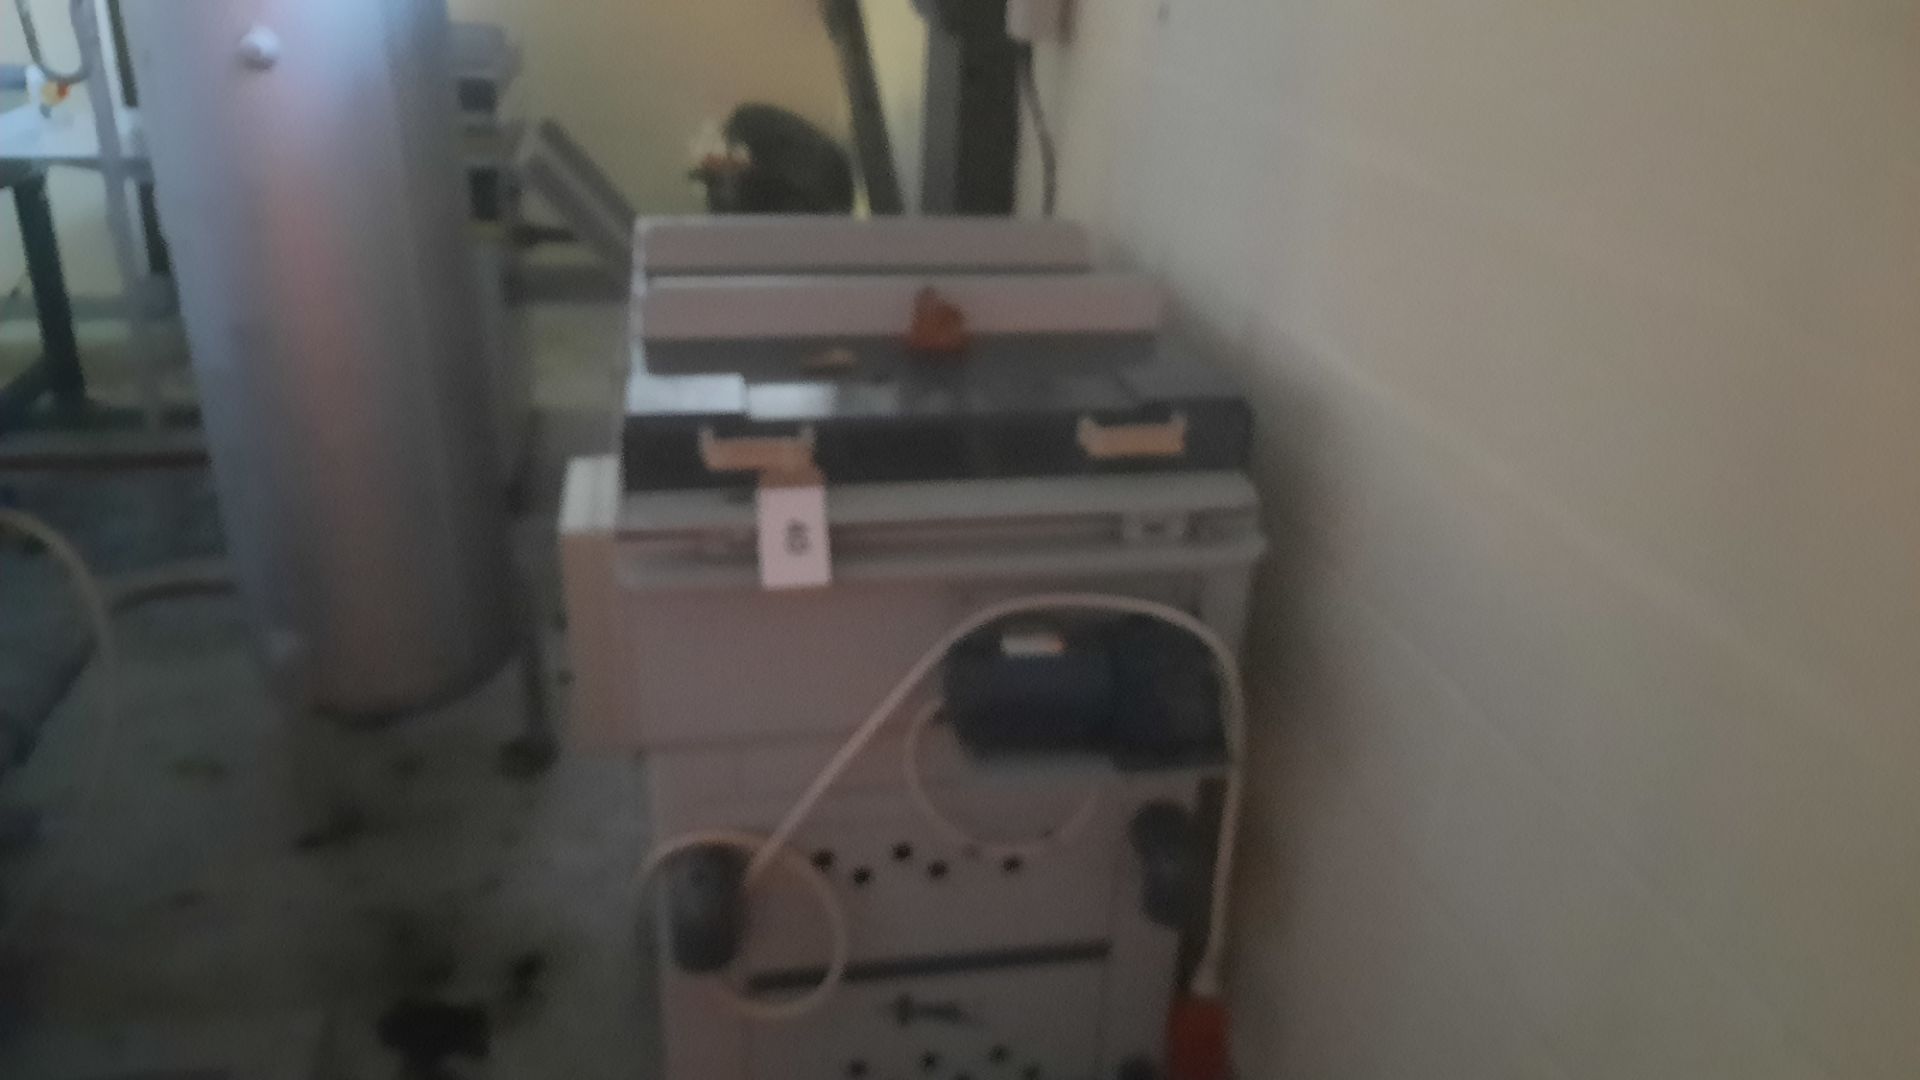 1: Adam Pill, Dryer - Not in Use - Image 2 of 5